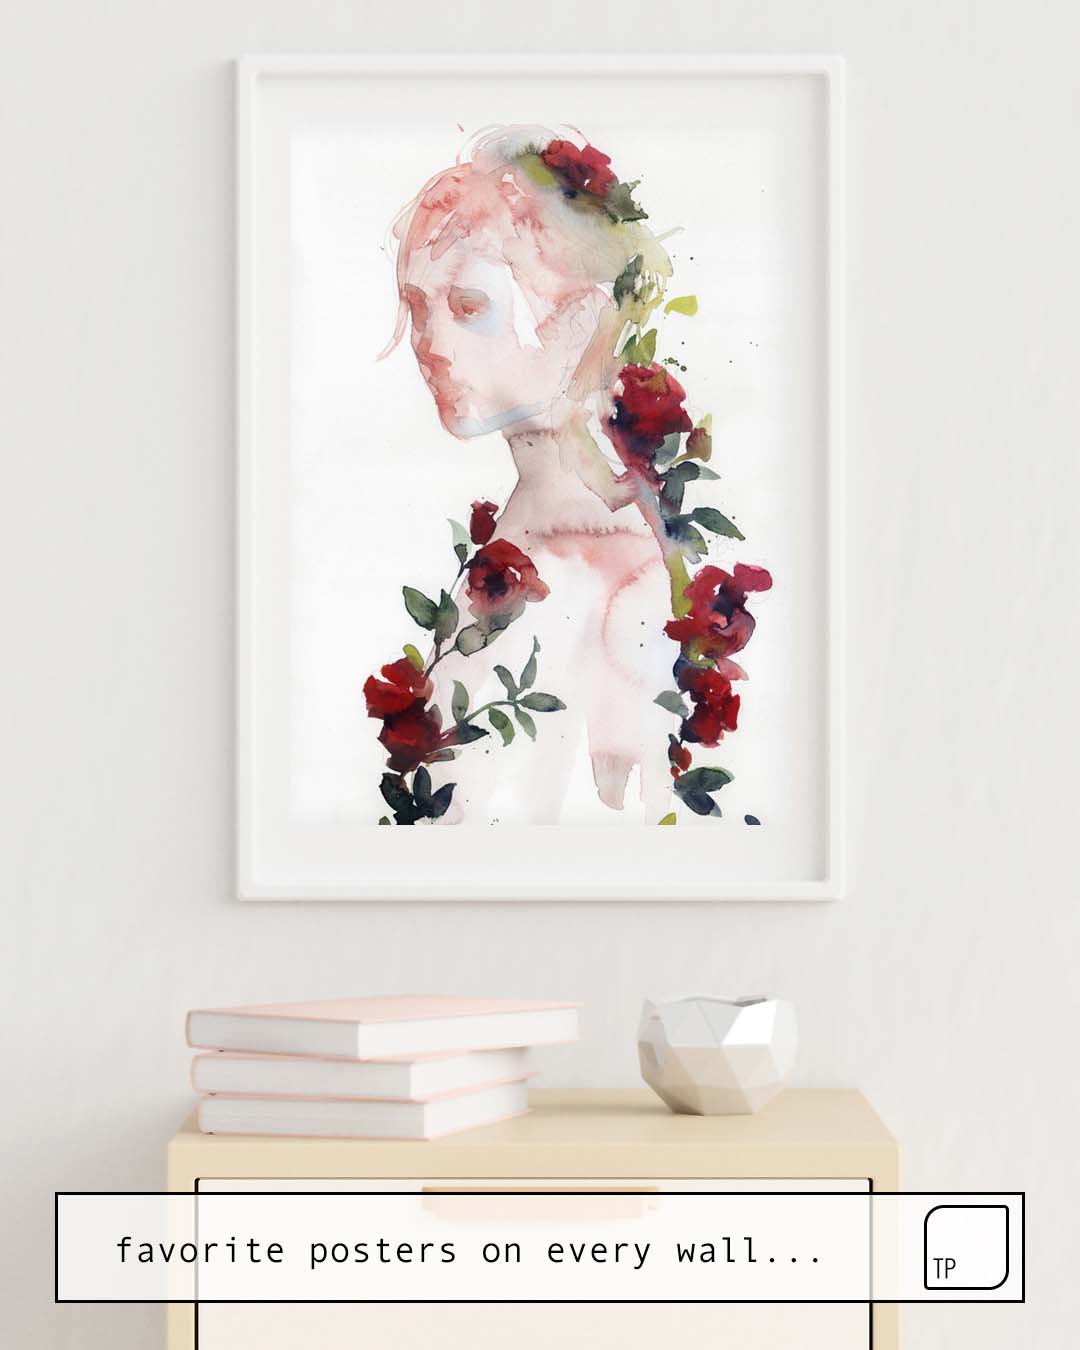 The photo shows an example of furnishing with the motif RED ROSES by Agnes Cecile as mural